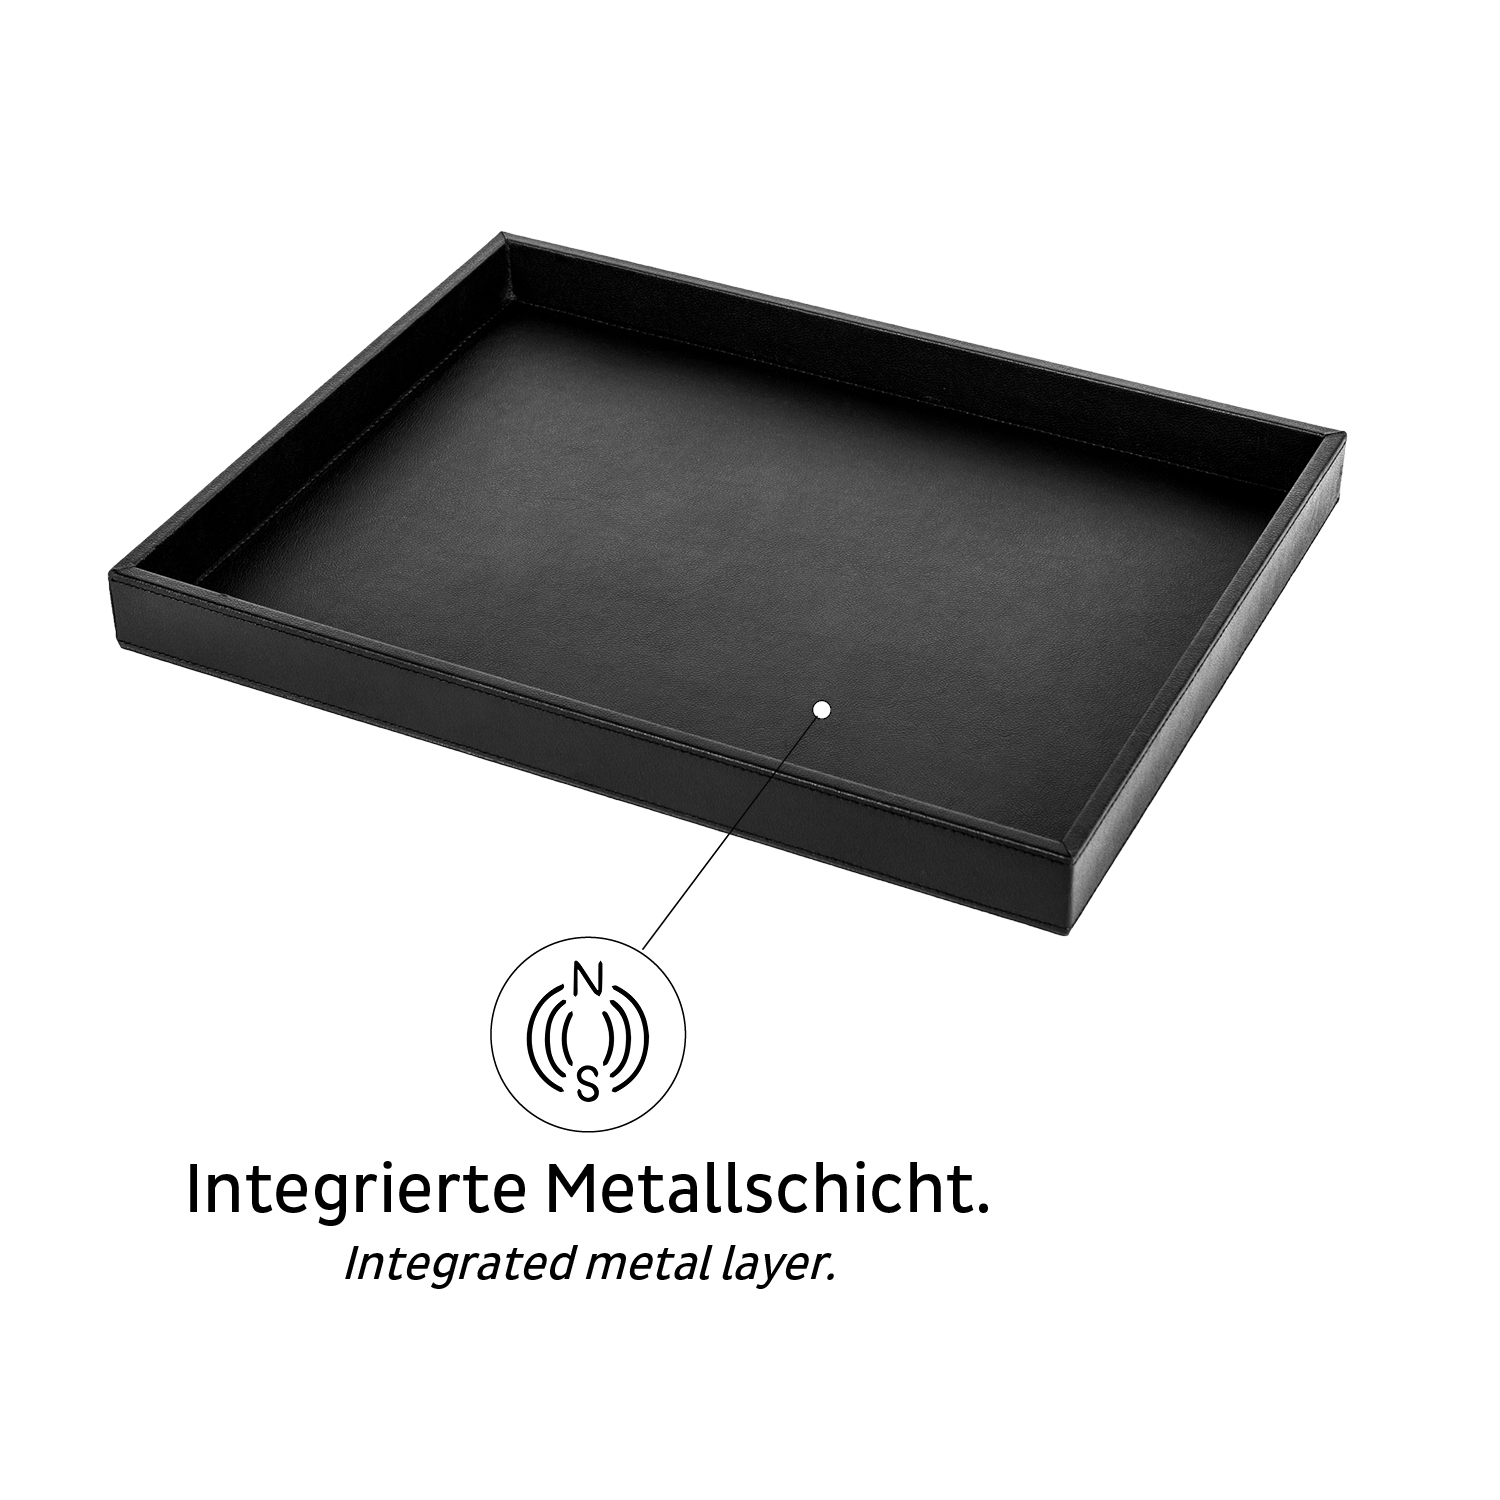 Metall-Nano-Matte für cleveres Magnetglas-System - silwy | Germany Made in